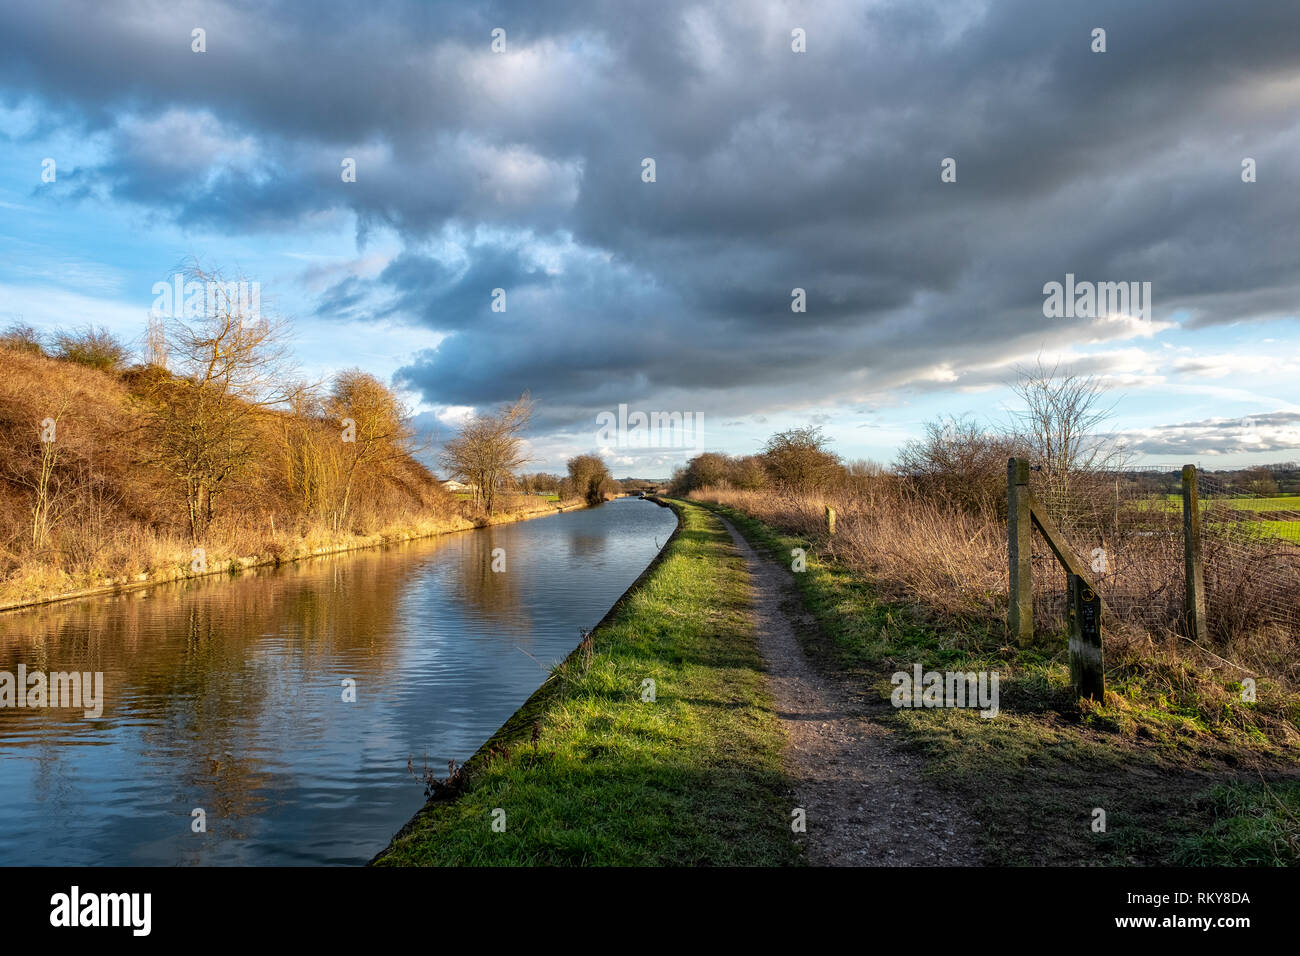 Oncoming thunderstorm with the Trent and Mersey canal near Sandbach Cheshire UK Stock Photo